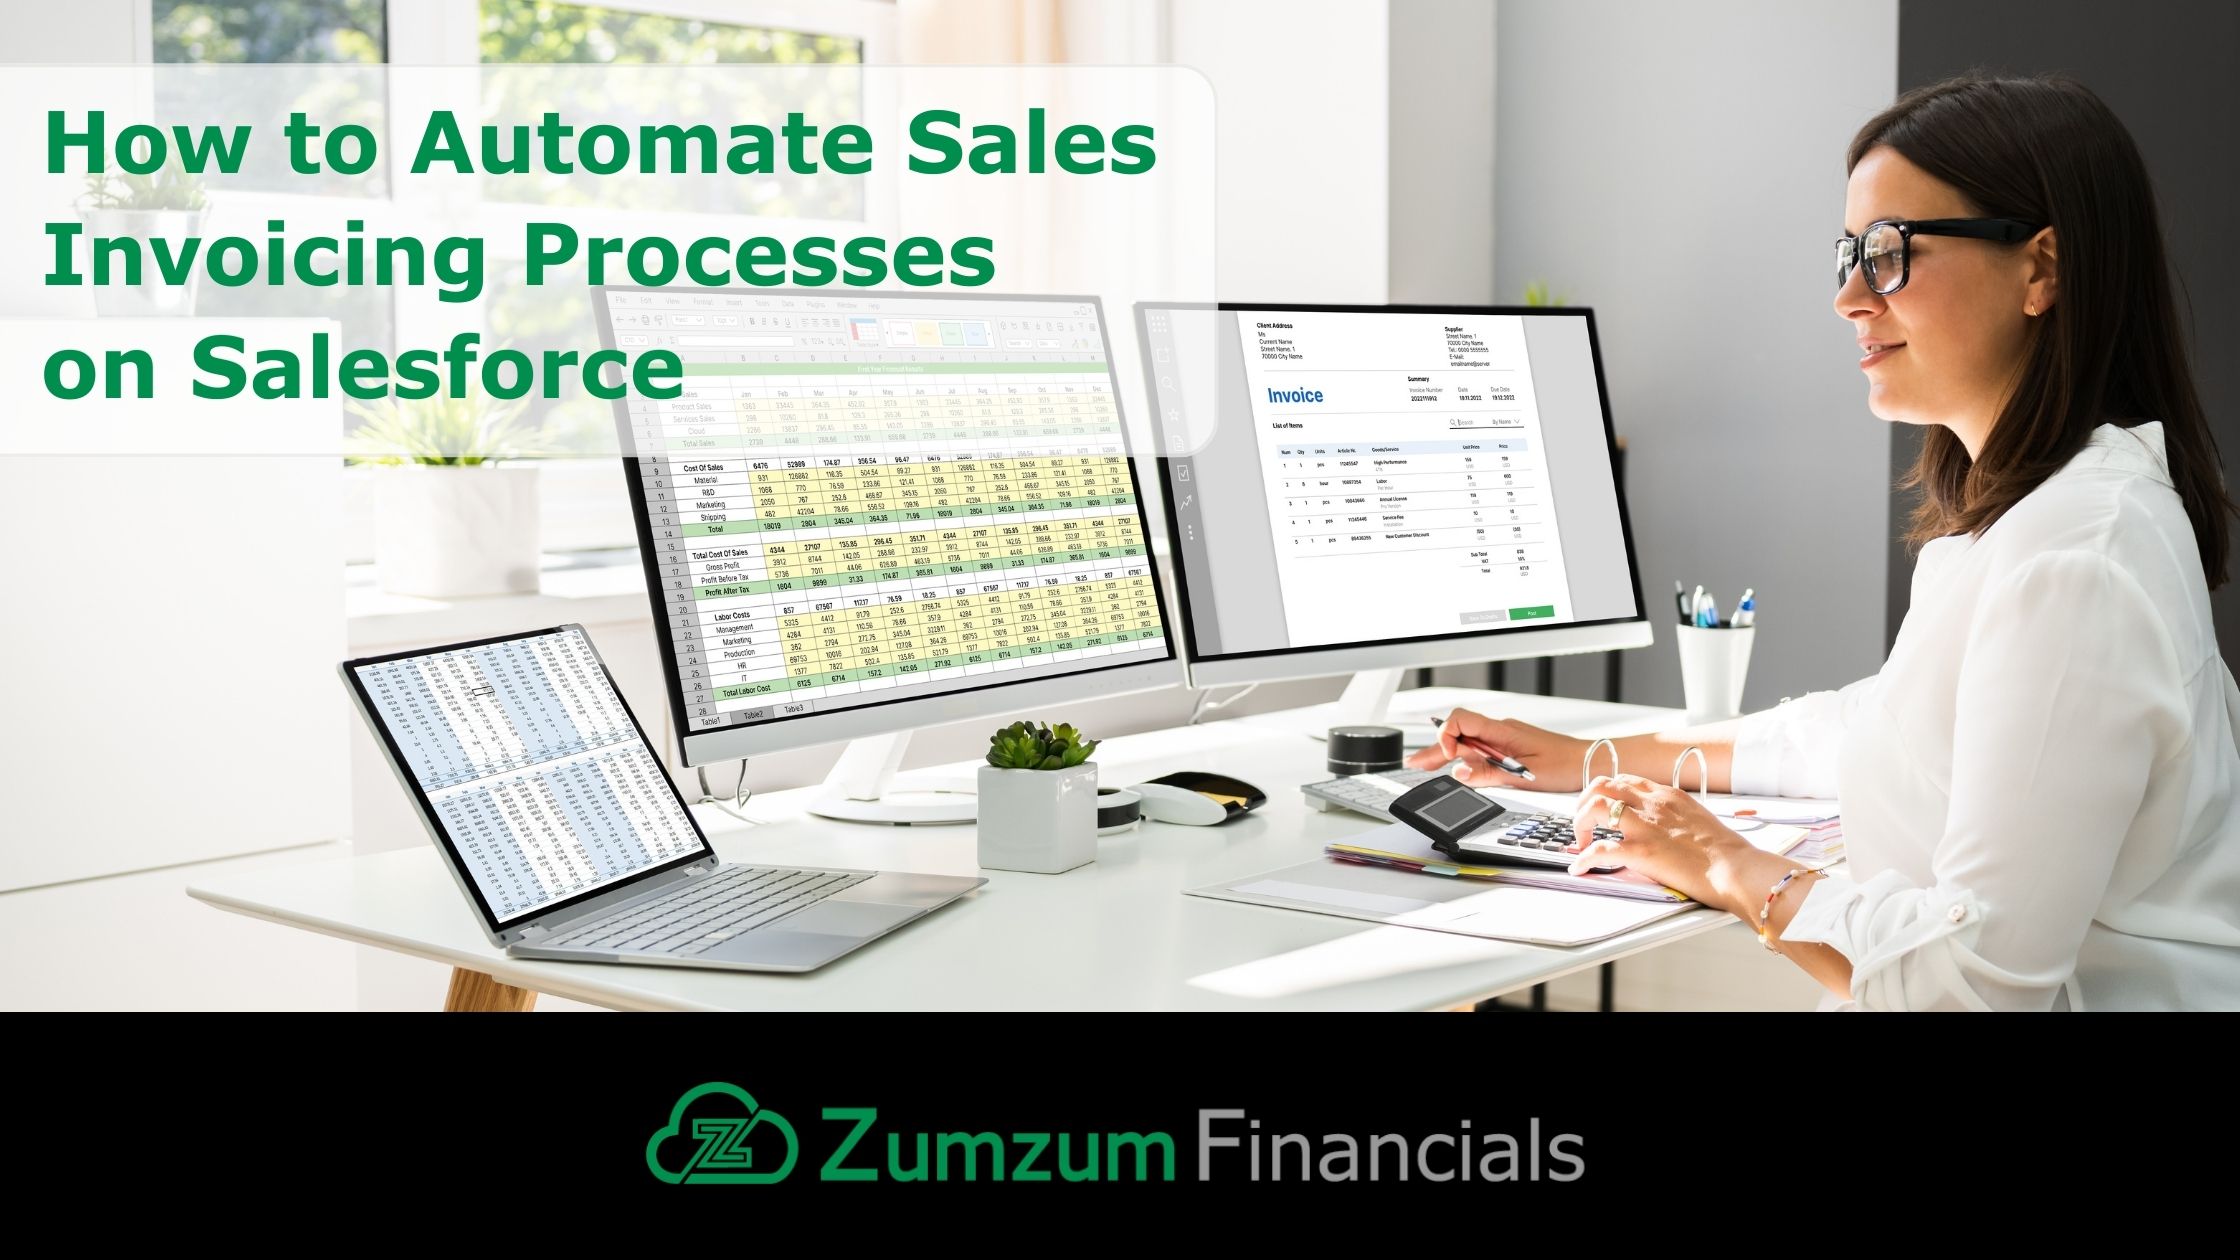 How to Automate Sales Invoicing Processes on Salesforce